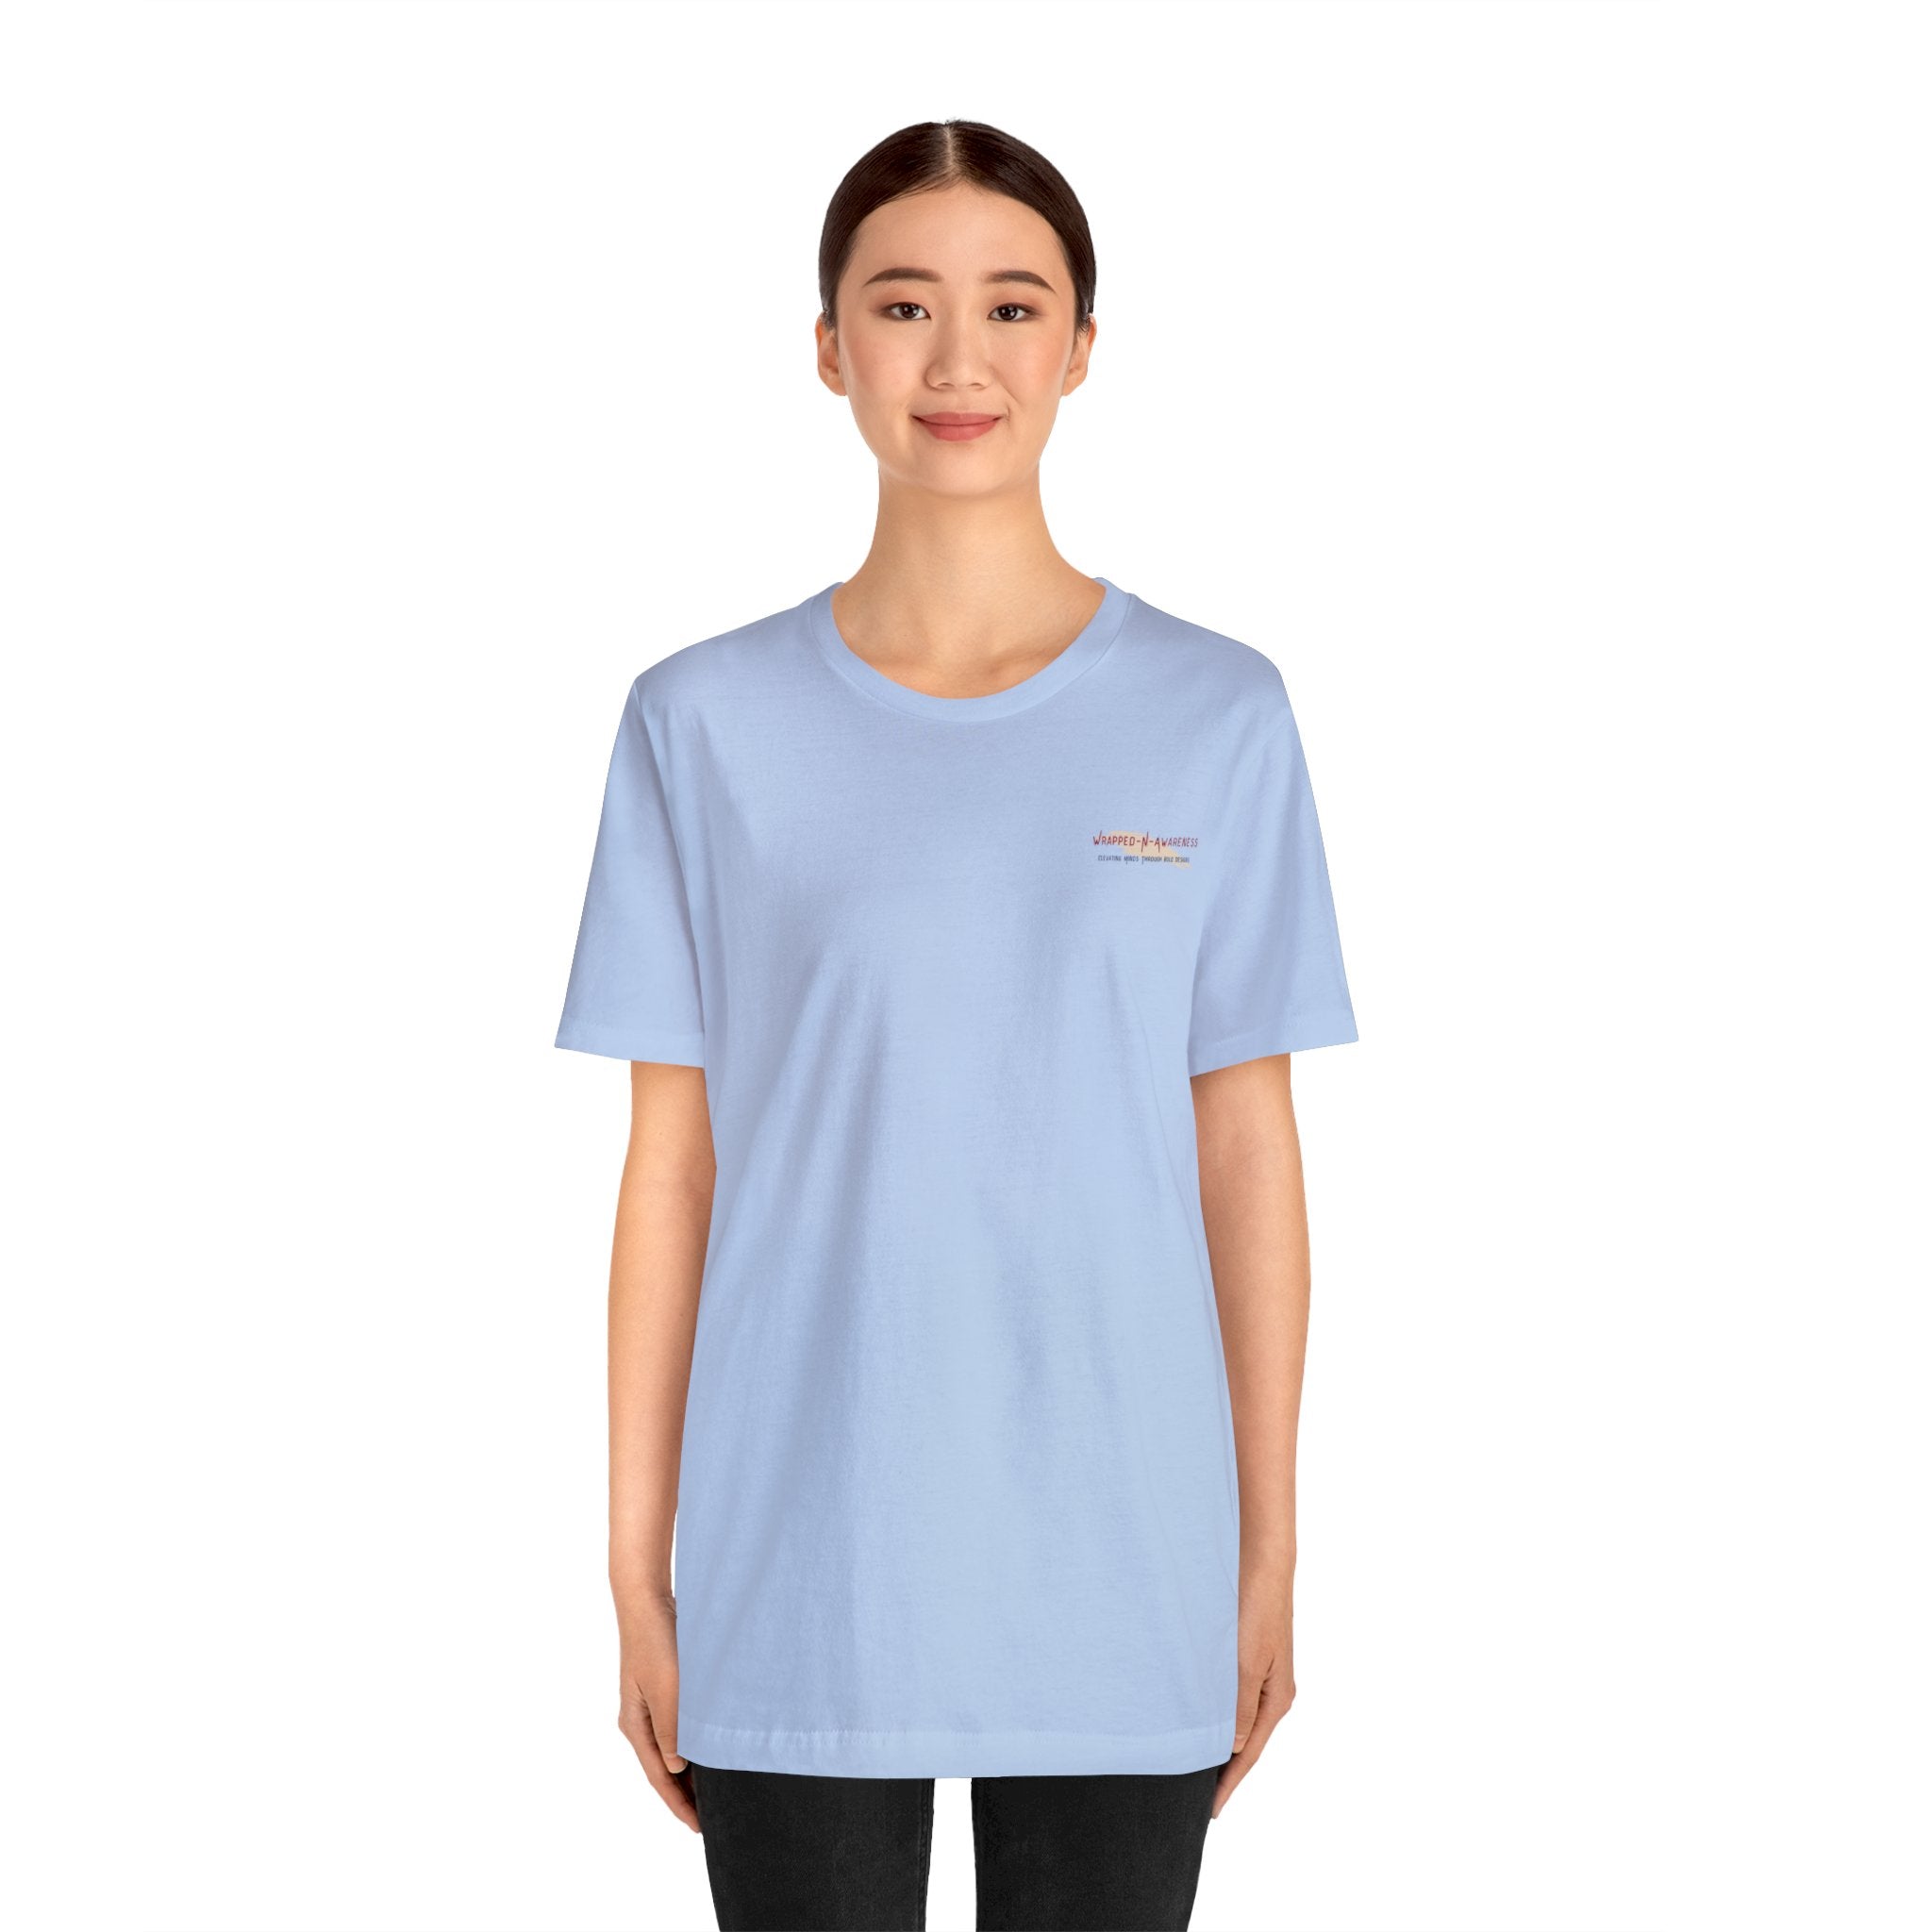 Find Your Balance Jersey Tee - Bella+Canvas 3001 Heather Mauve Airlume Cotton Bella+Canvas 3001 Crew Neckline Jersey Short Sleeve Lightweight Fabric Mental Health Support Retail Fit Tear-away Label Tee Unisex Tee T-Shirt 13567197802554501931_2048 Printify